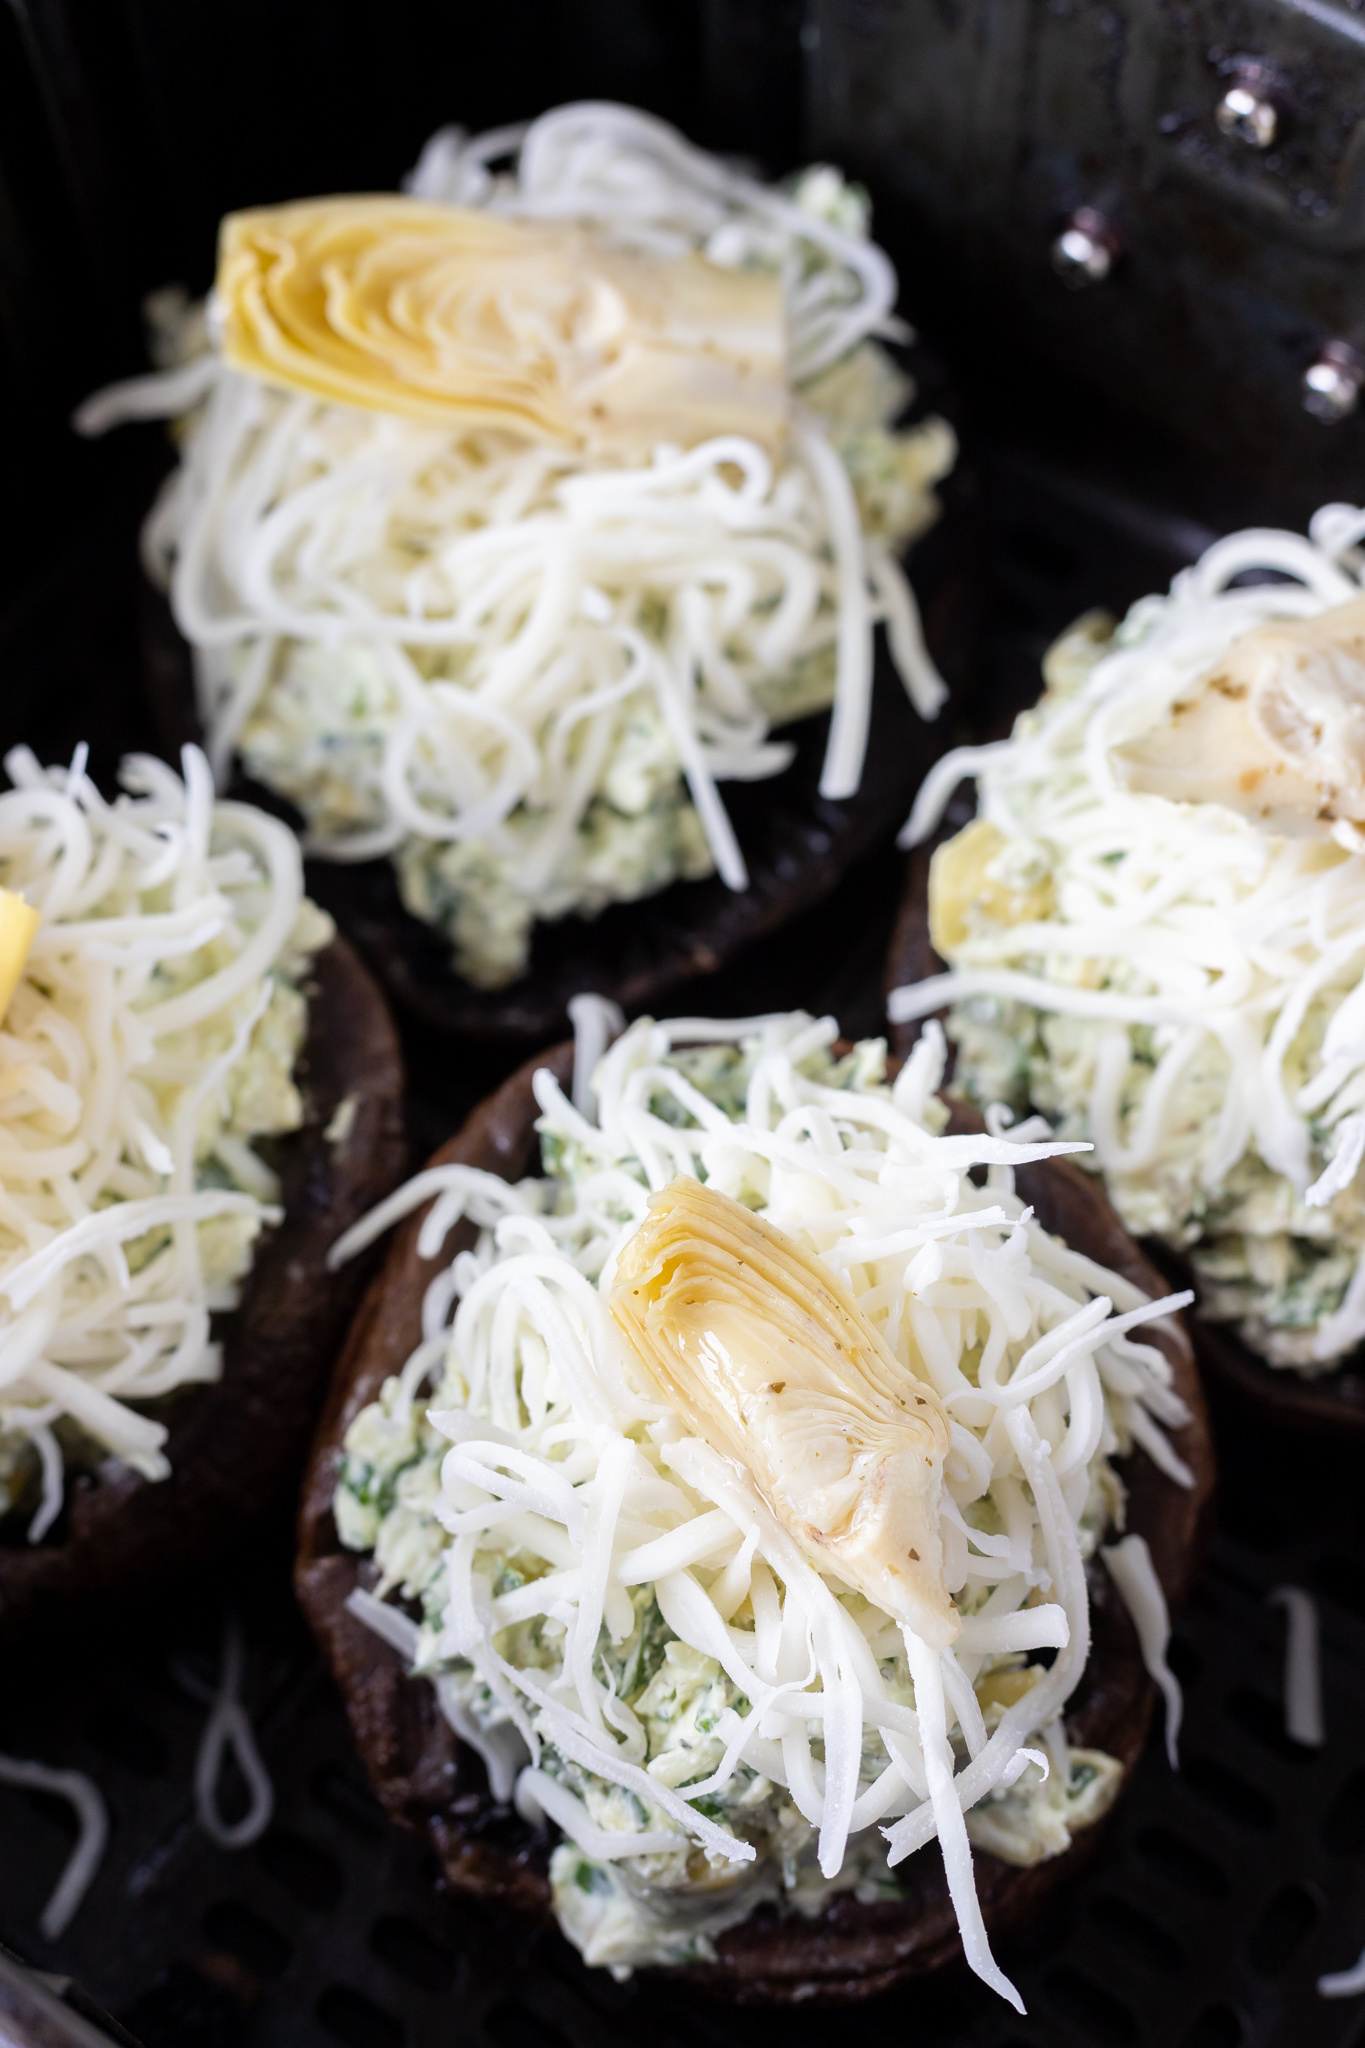 mushrooms topped with shredded cheese and artichoke heart